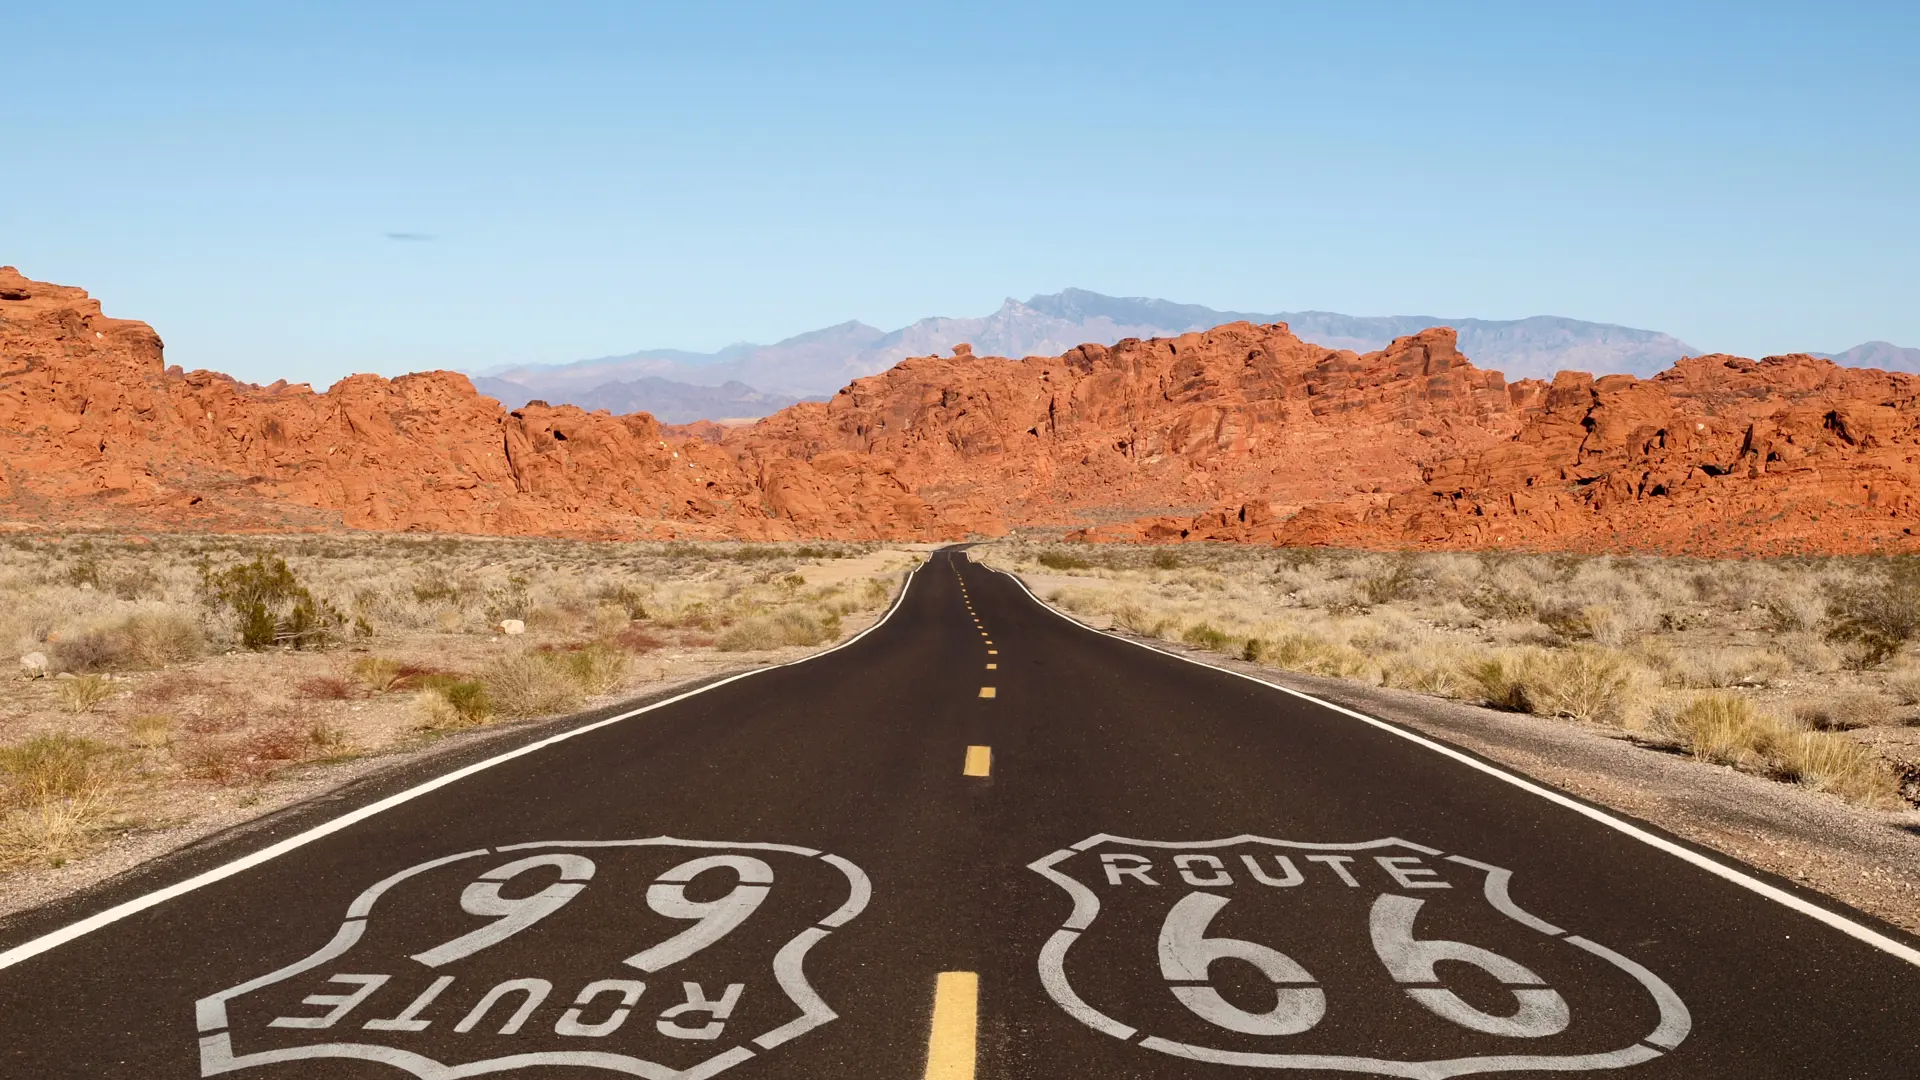 shutterstock_121945762 Route 66 pavement sign with Mojave desert red rock mountains..jpg